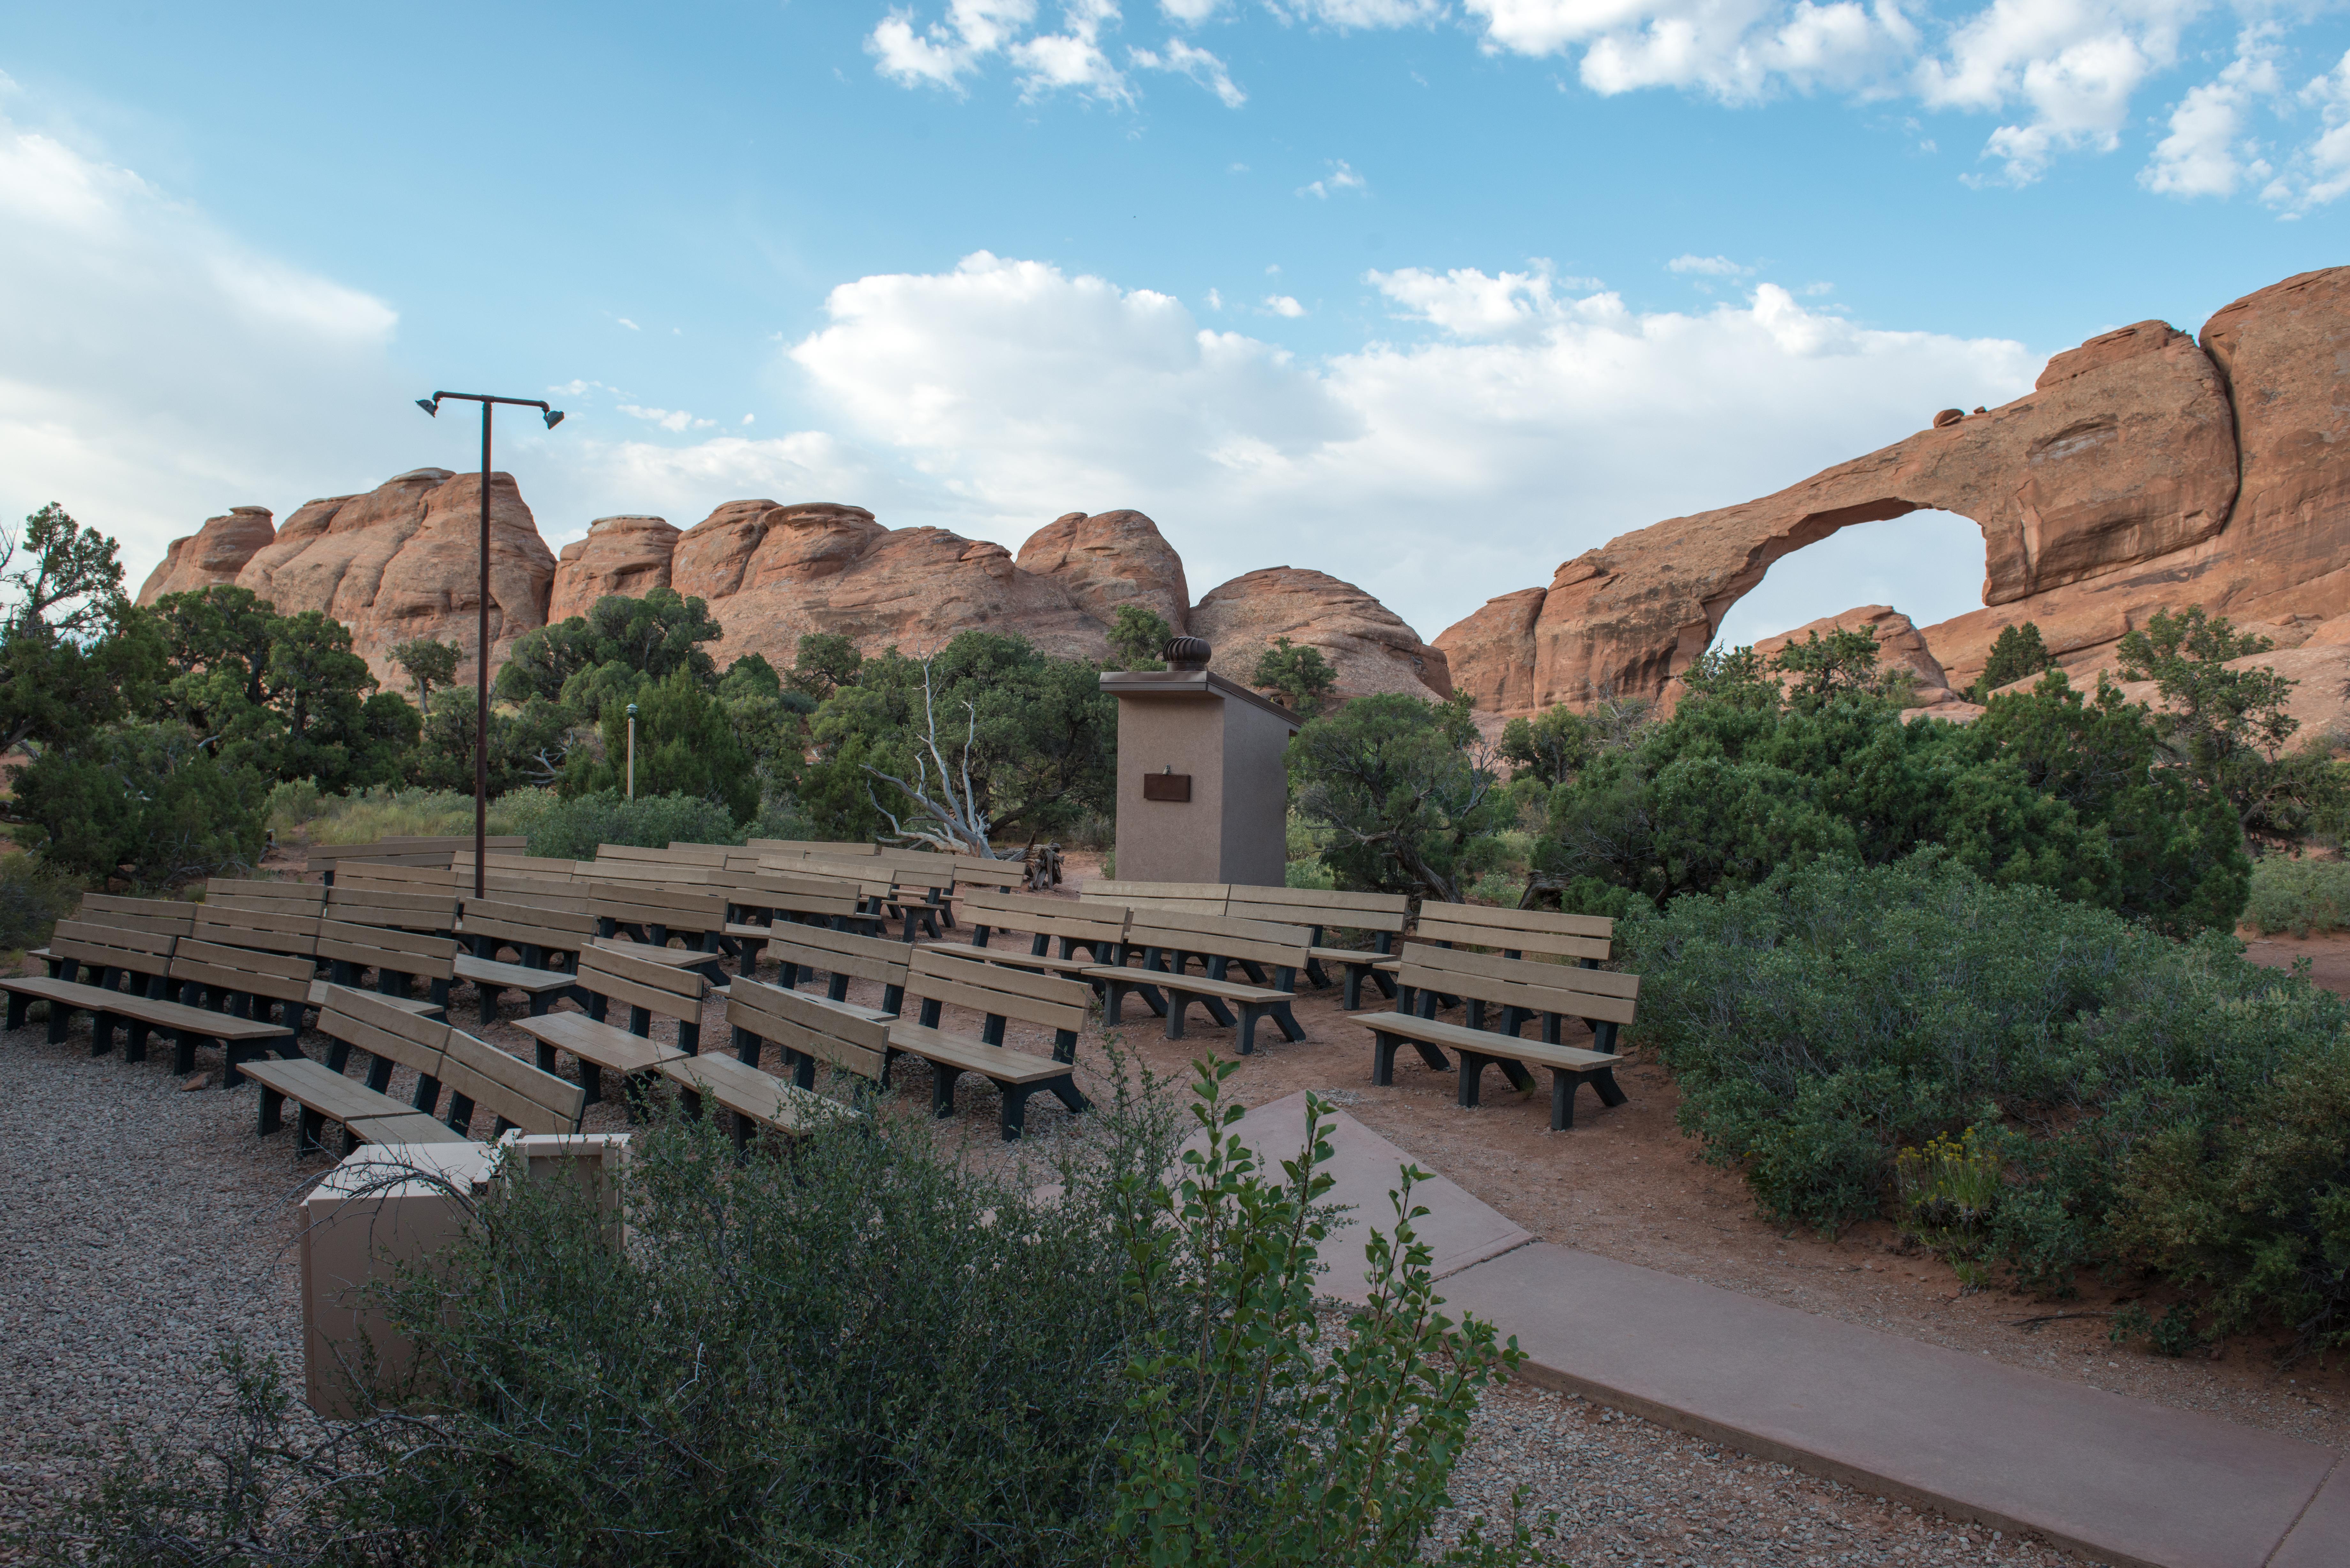 several benches sit in a semi circle with a broad, stone arch in the background